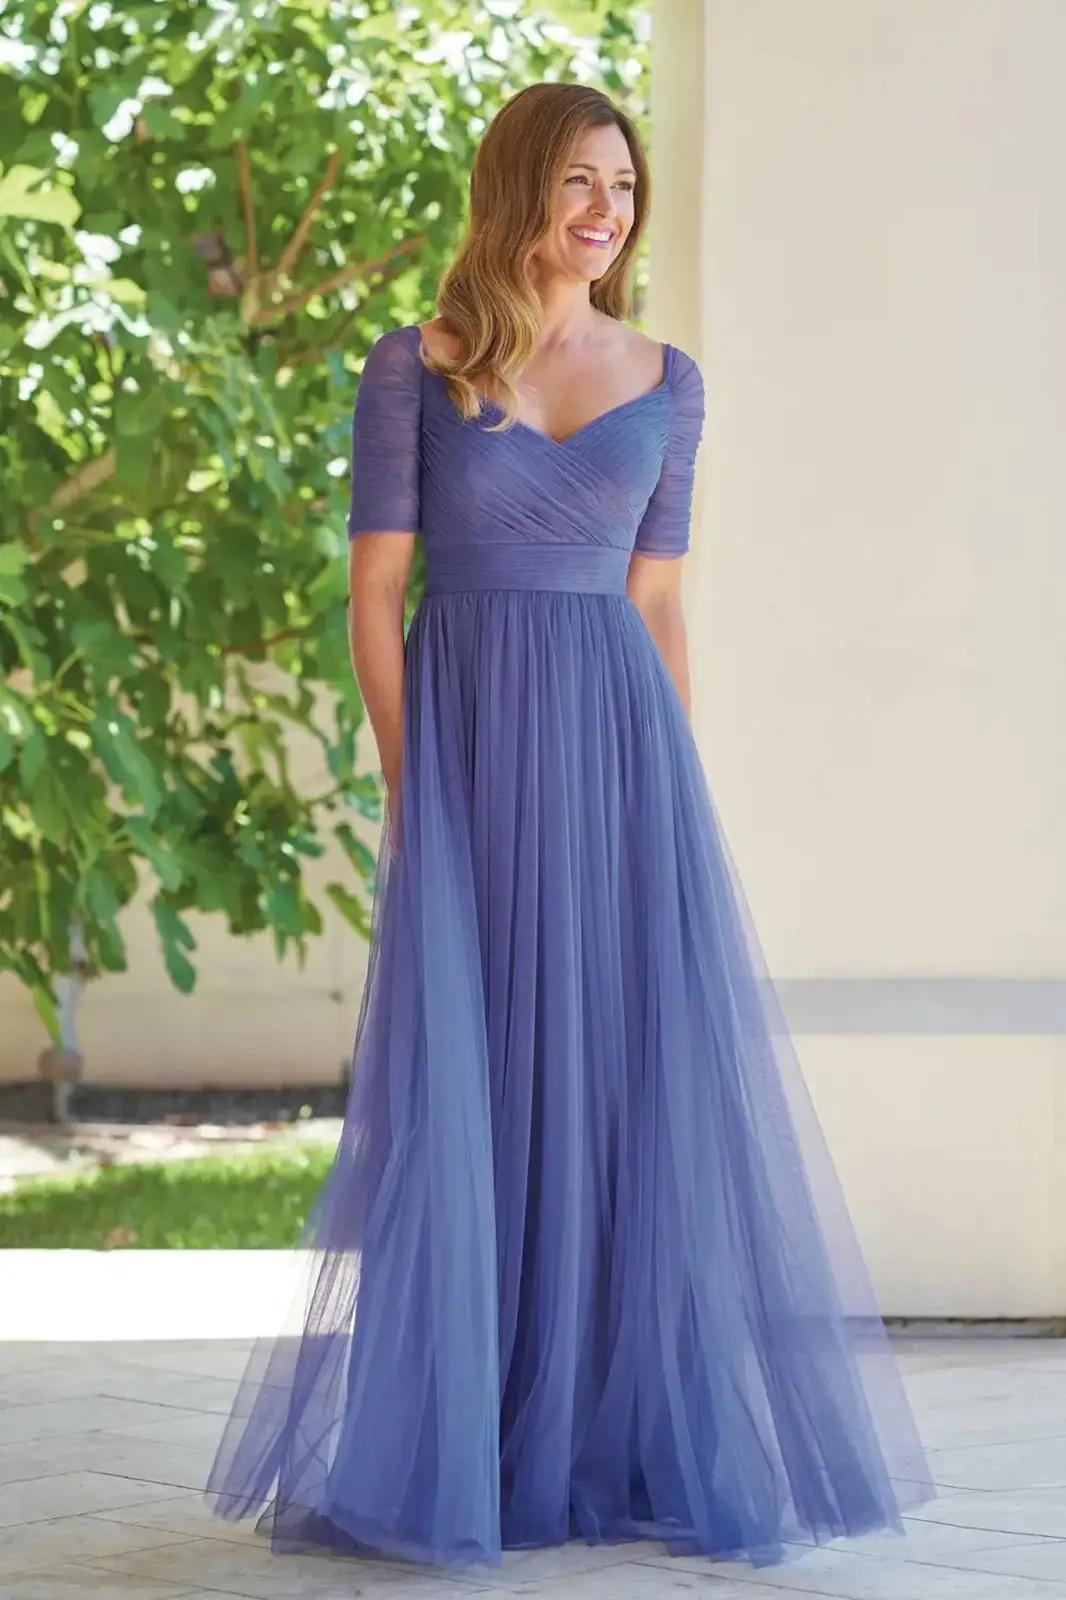 Spring Inspired Mother of The Bride Dresses Image